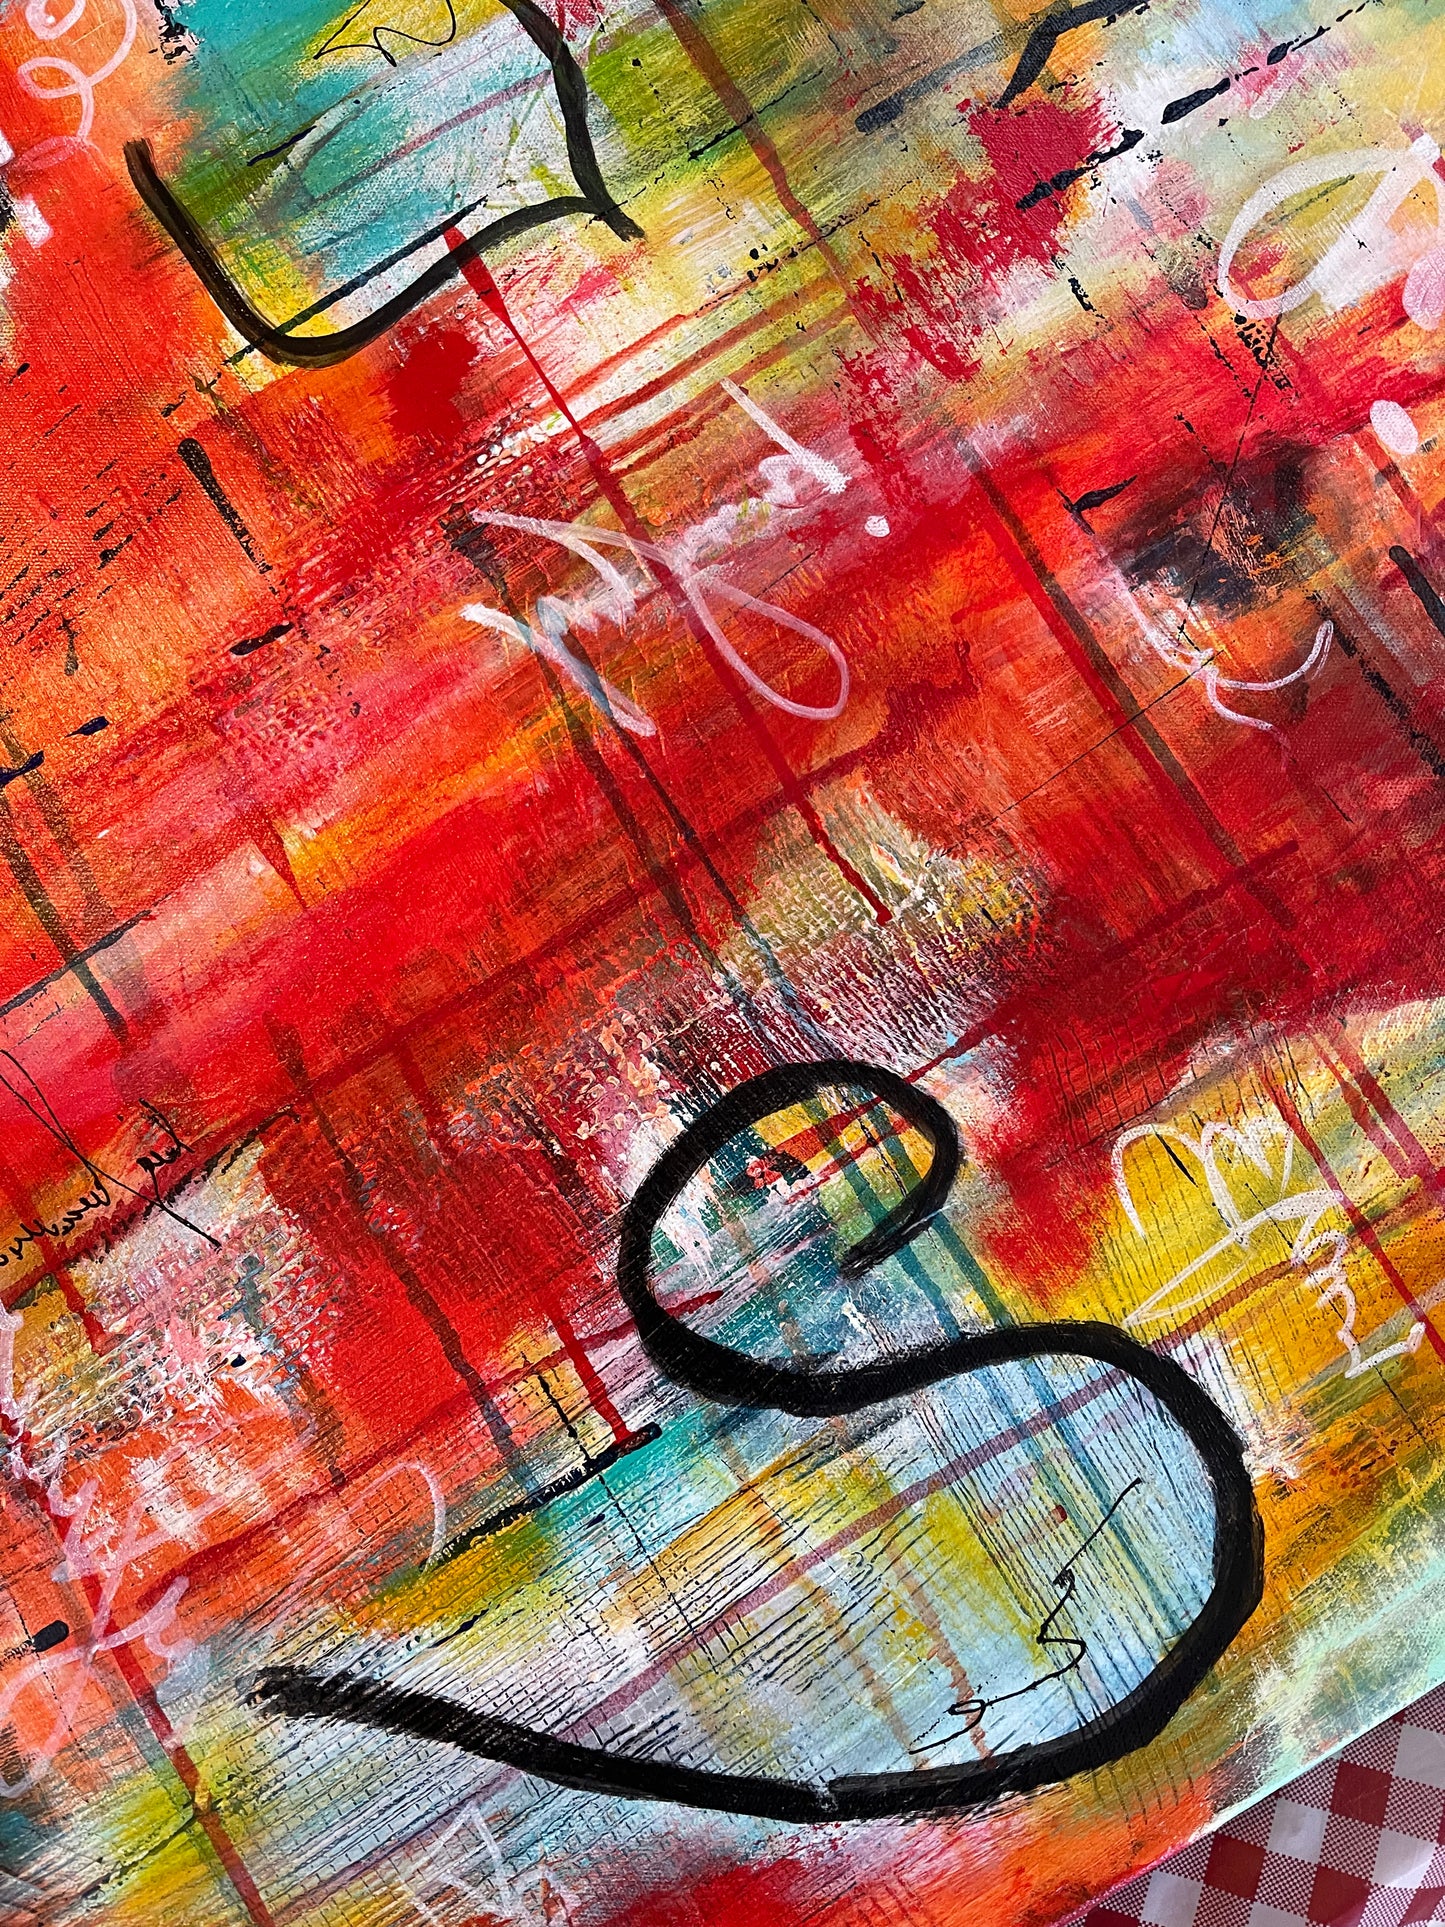 Dala #2 - Swahili for 'To Create.' (24x48 Gallery Wrapped Canvas) 10 months Interest Free with ArtMoney